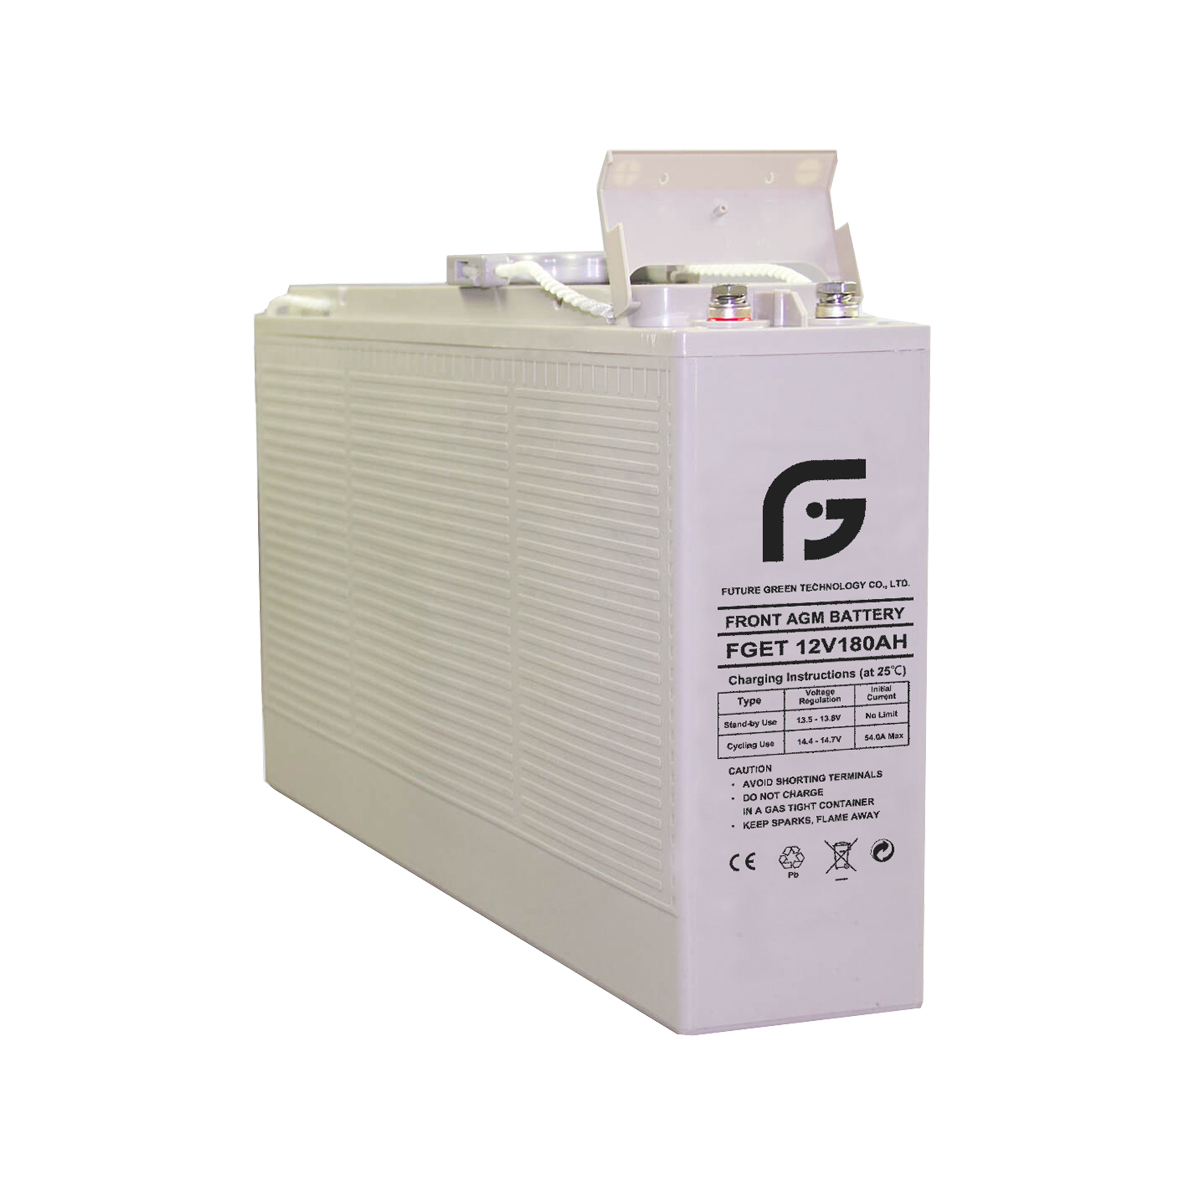 12V 180AH Front Access Solar Power Storage Battery